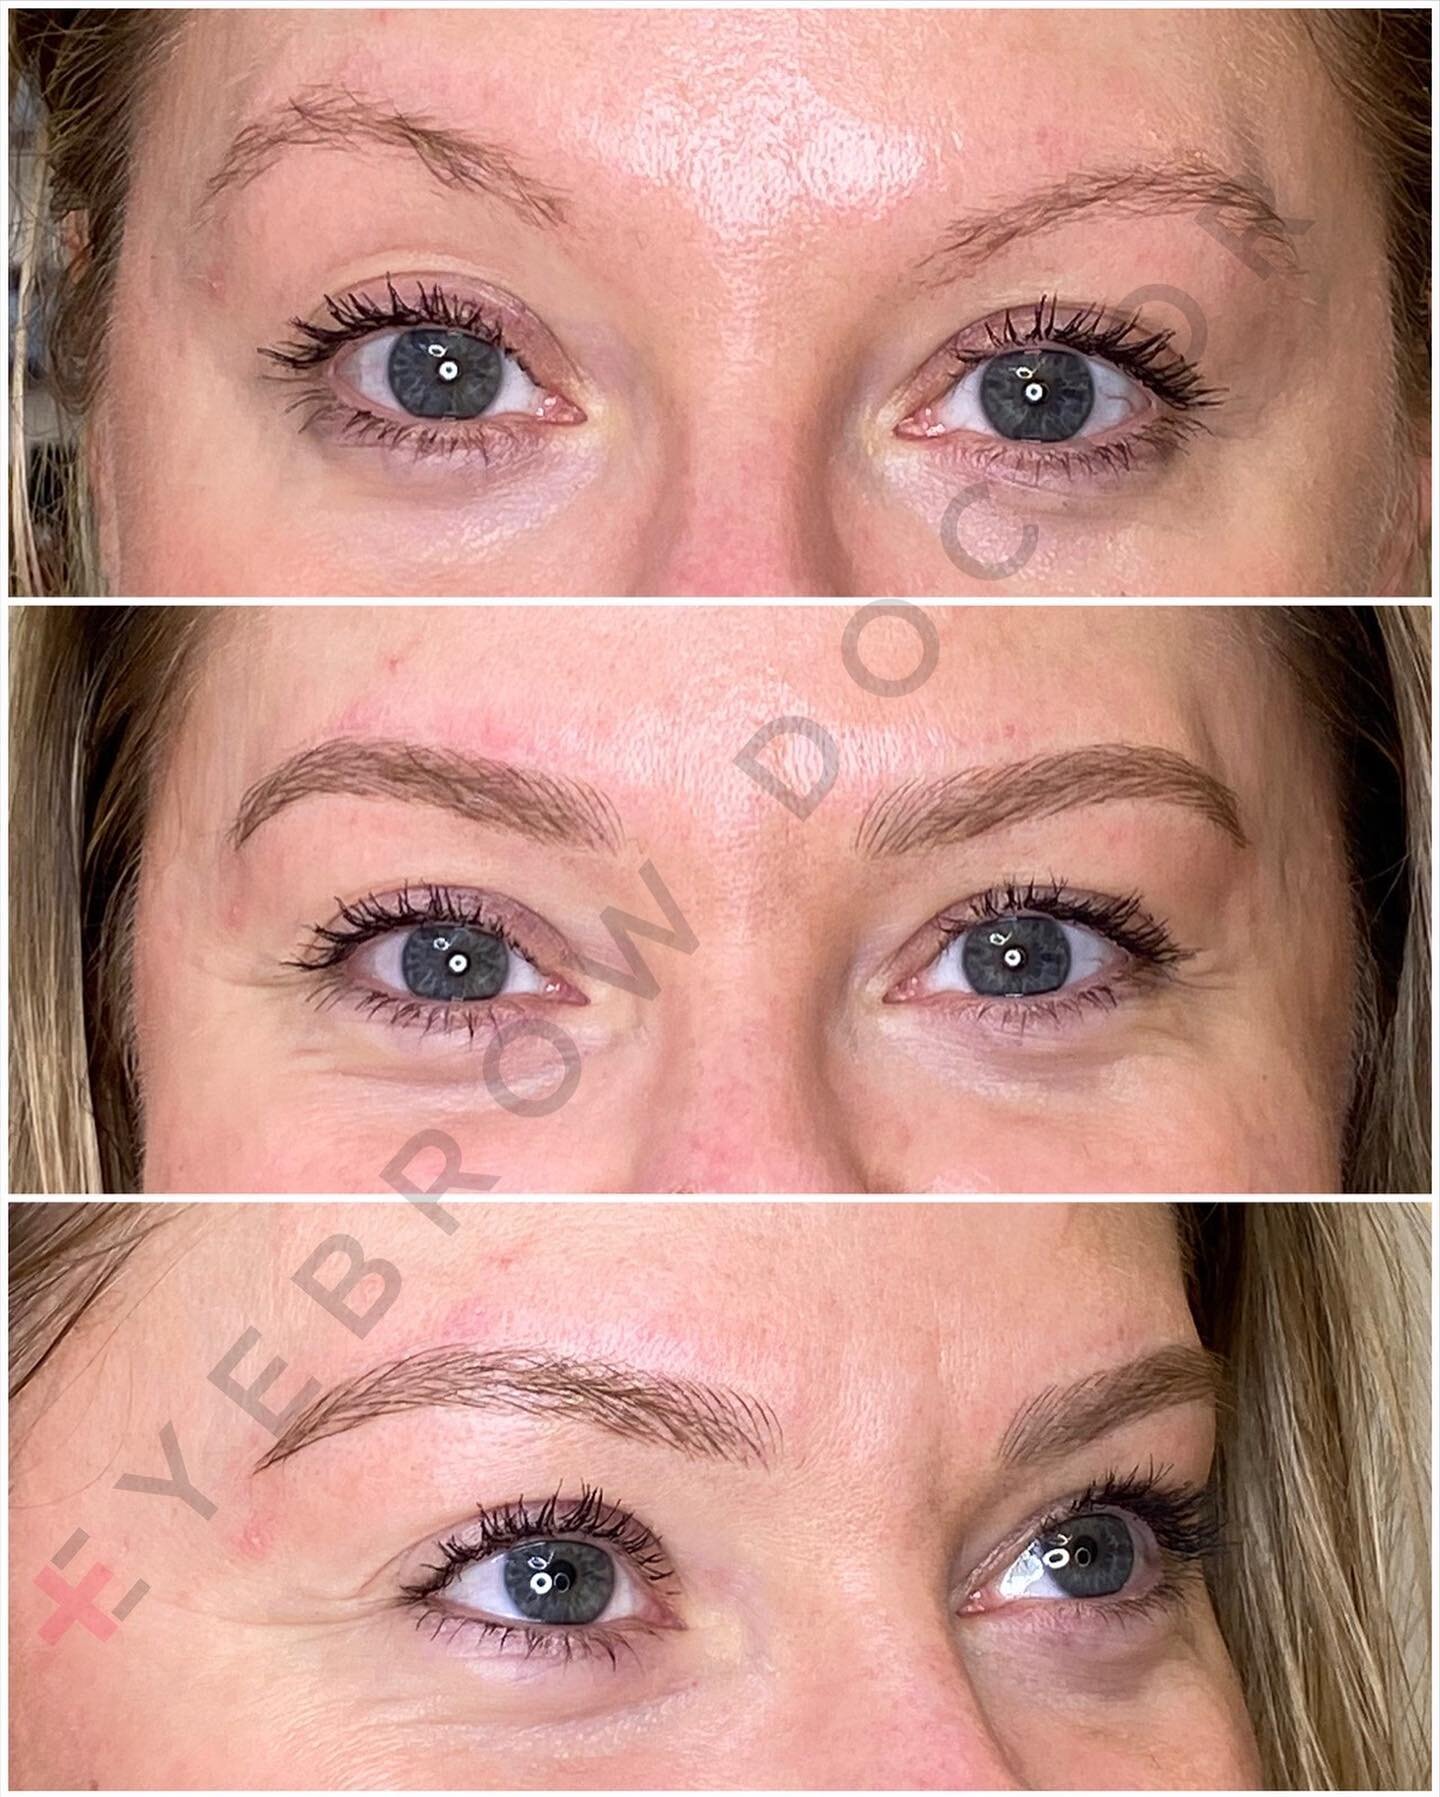 New new Microblading by Piret. To book yours visit EyebrowDoctor.com